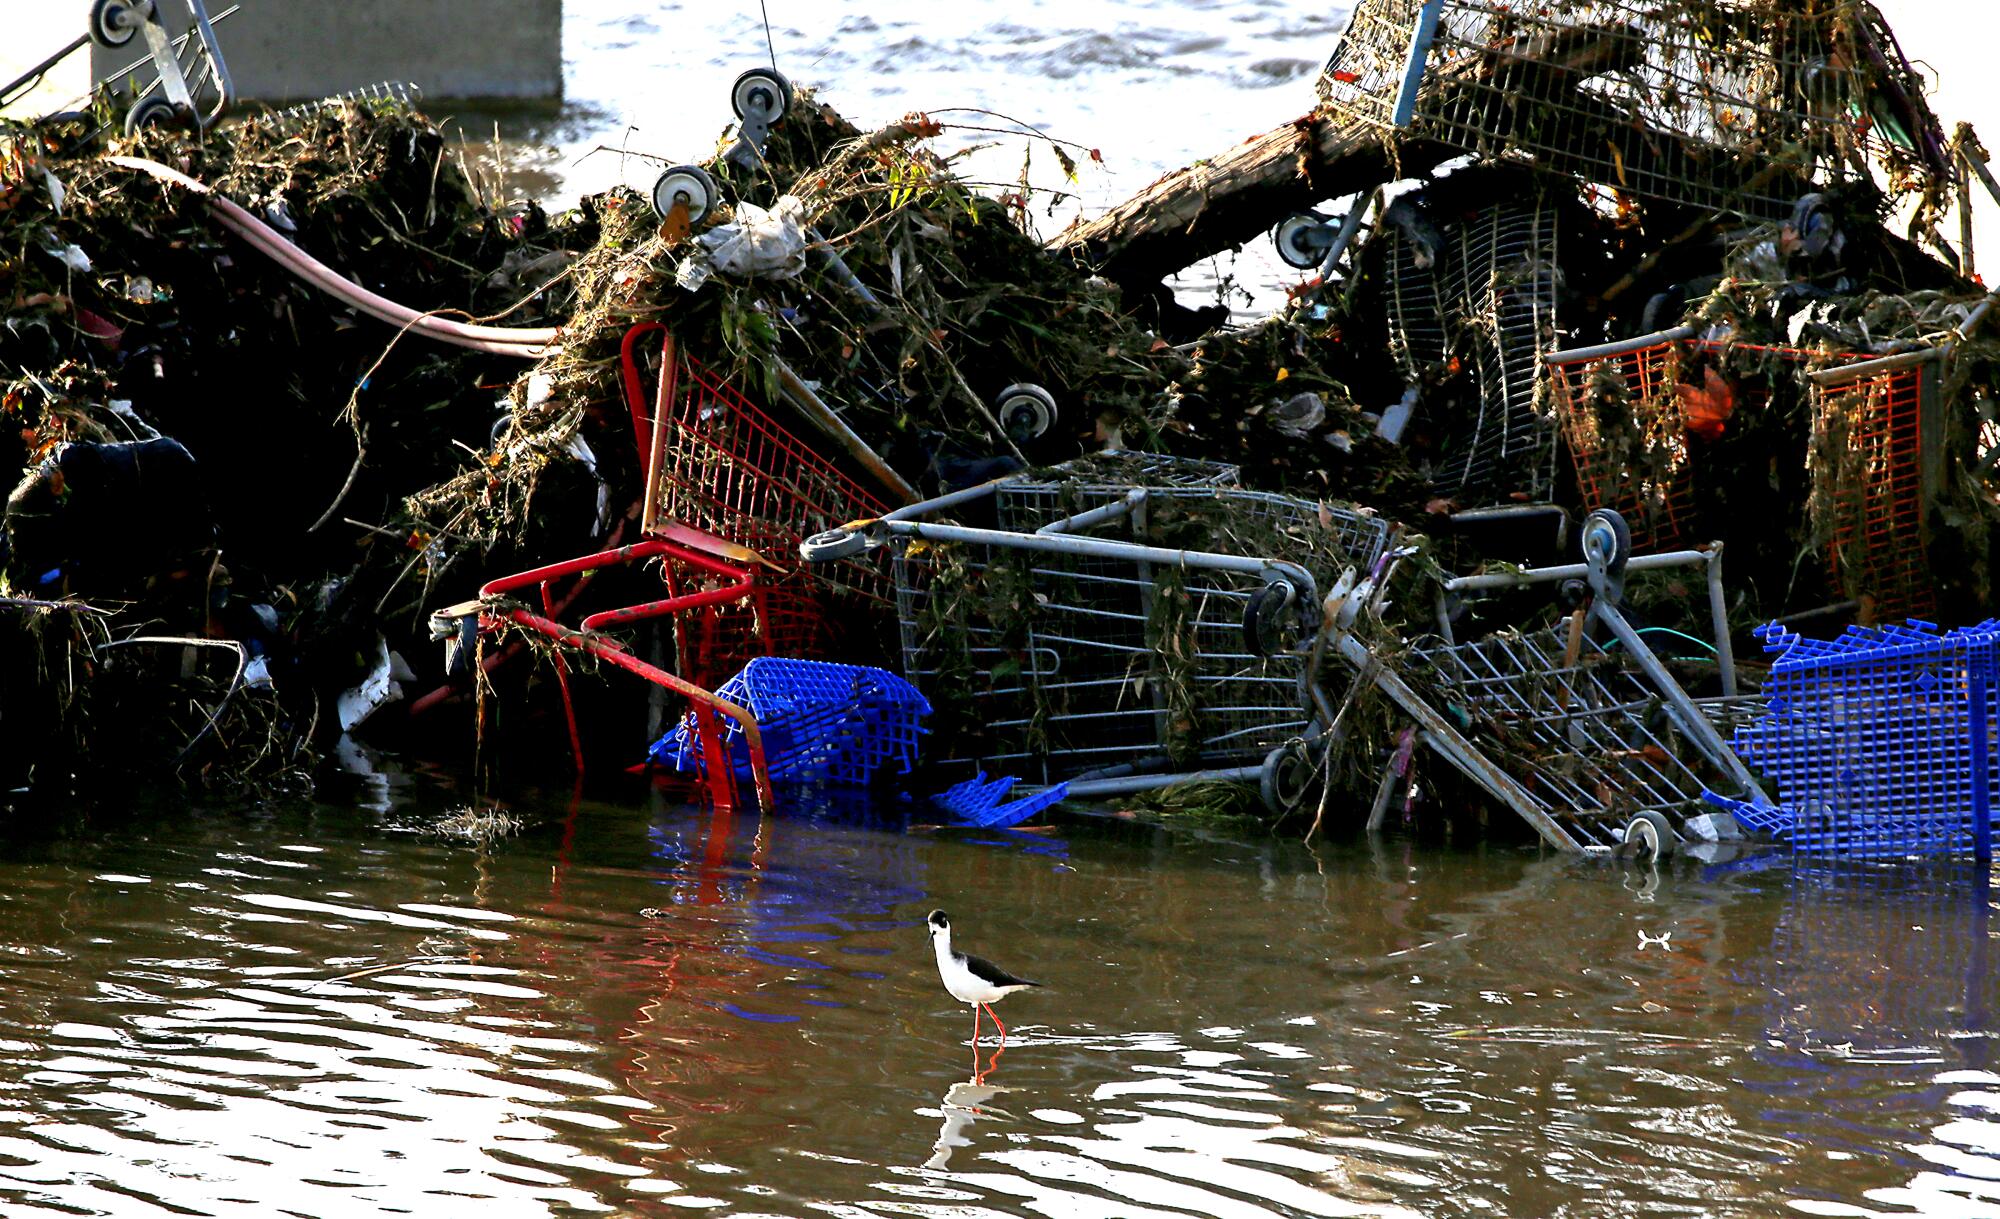 A bird forages near a mashup of shopping carts in the Los Angeles River in Long Beach.